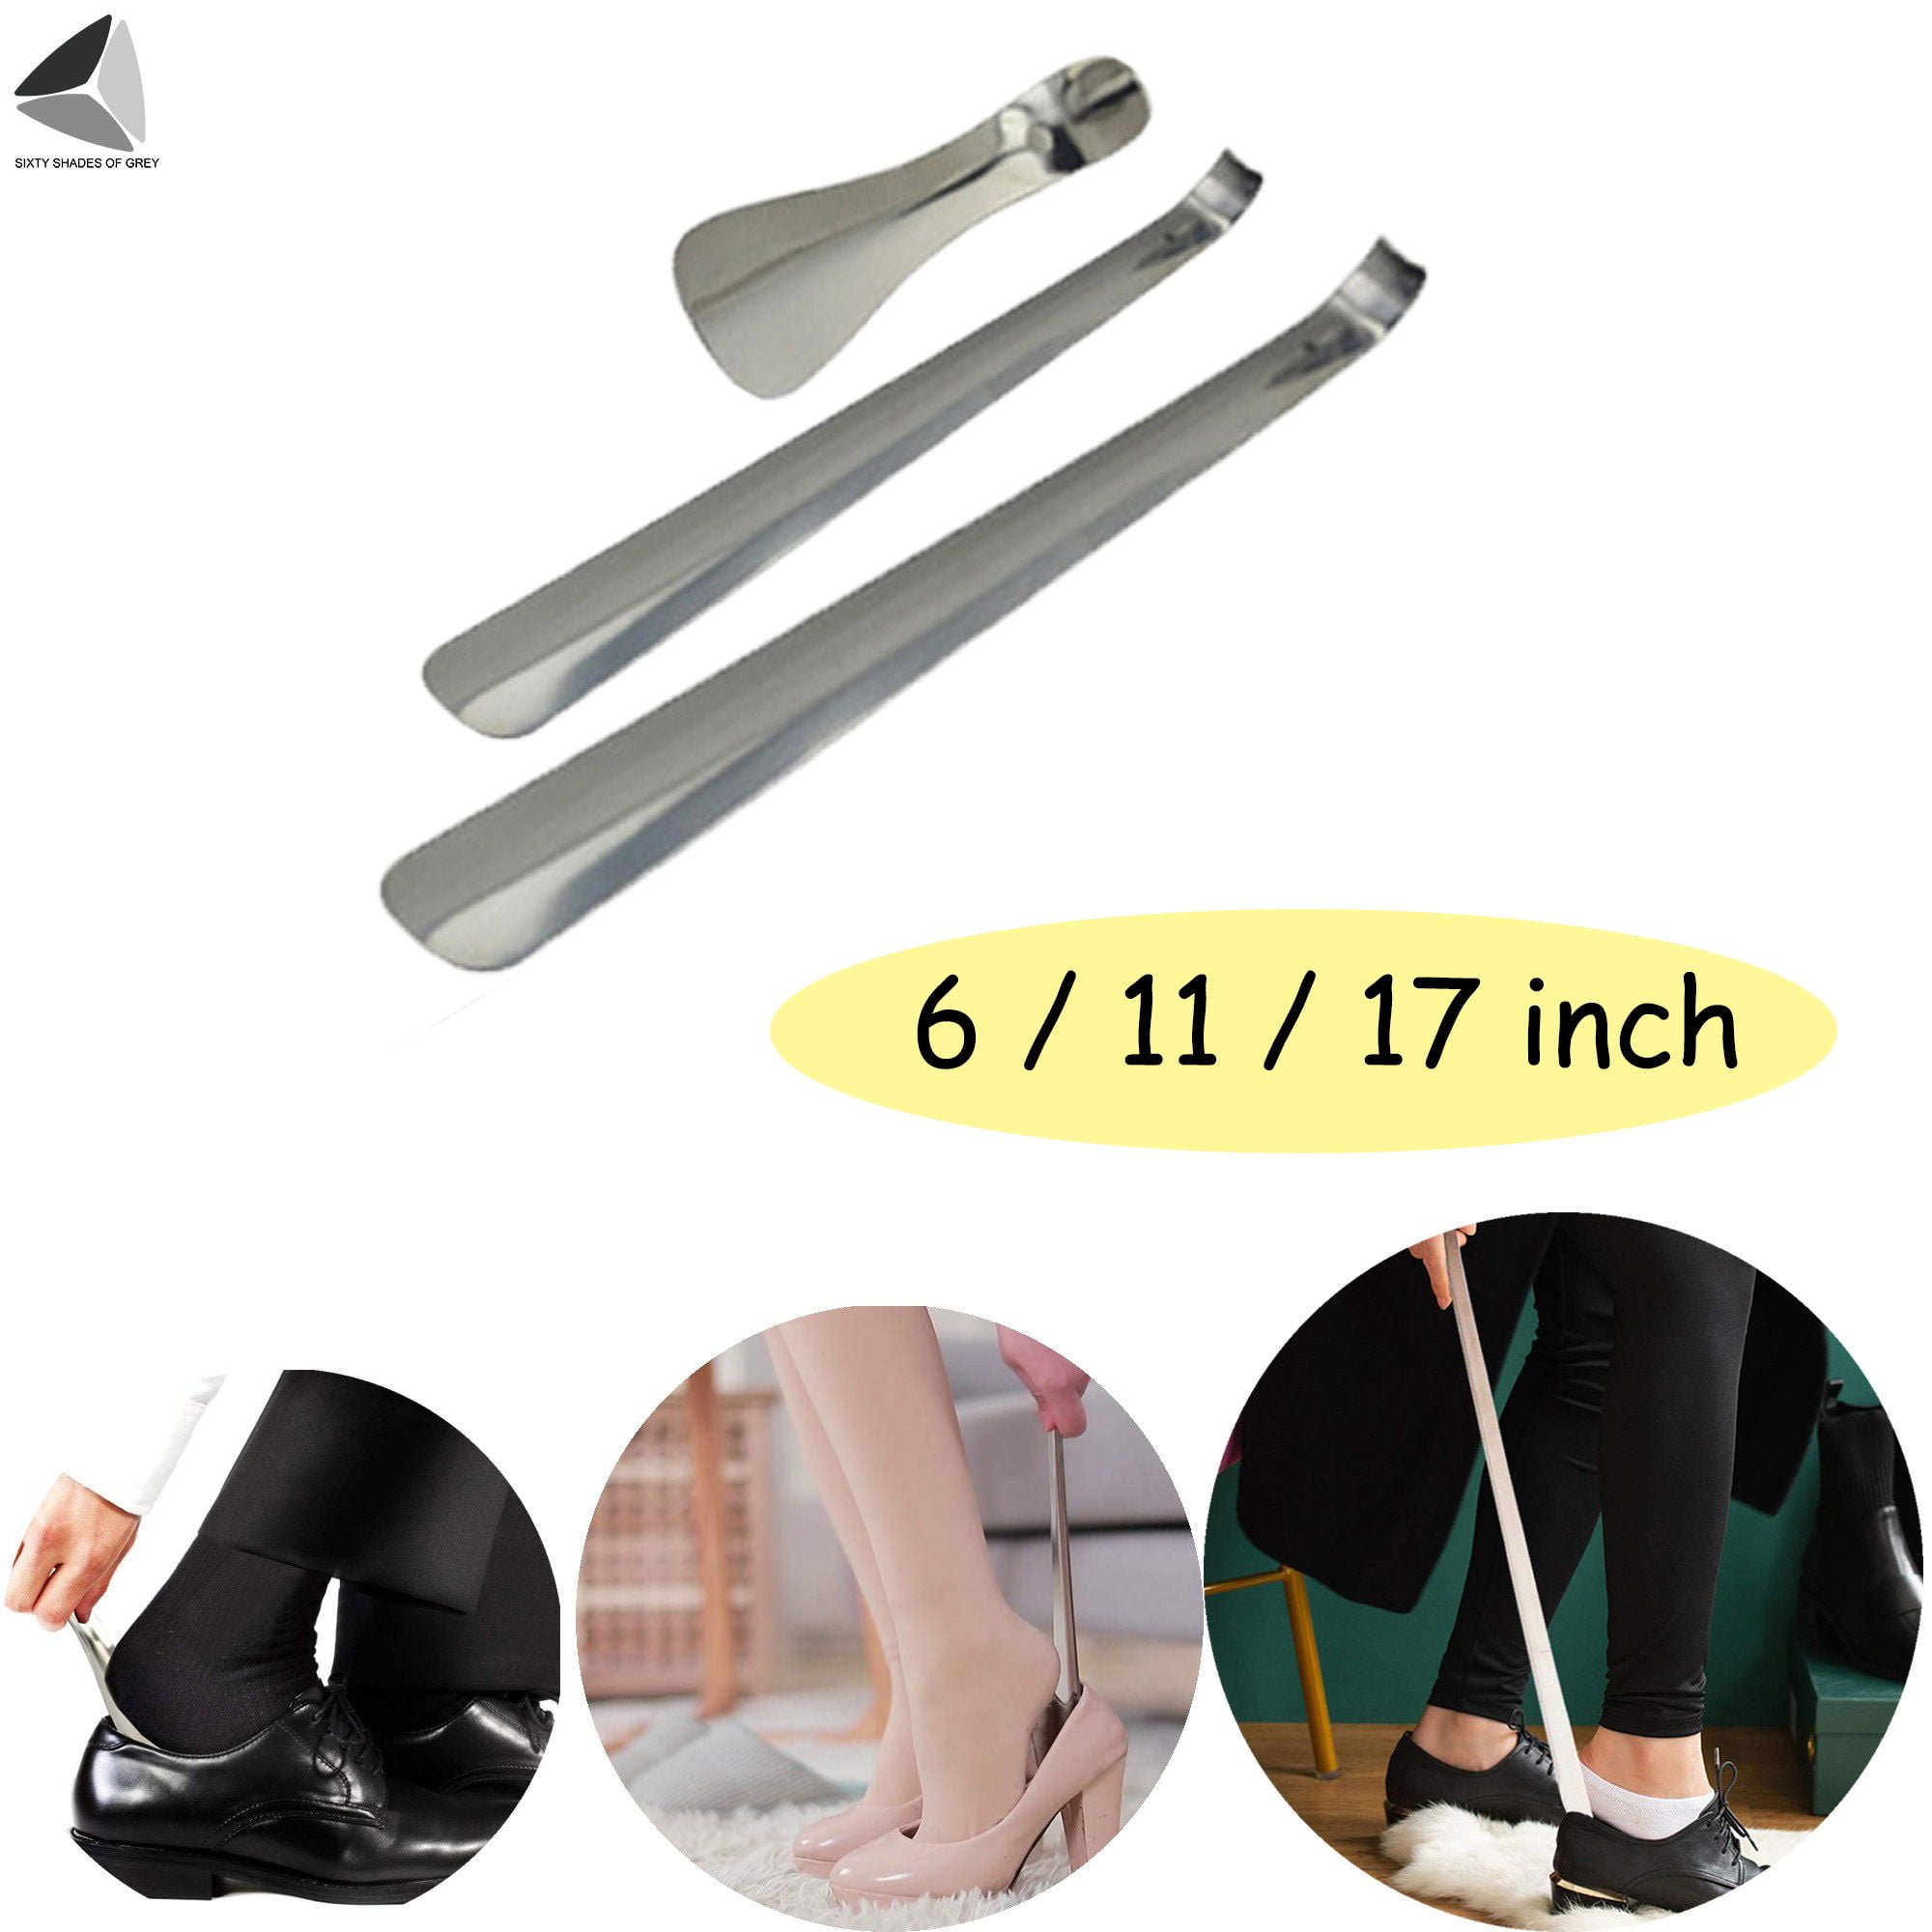 Handle Extendable Metal Shoehorn Shoe Horn Remover Mobility Aid Chic Czxy 